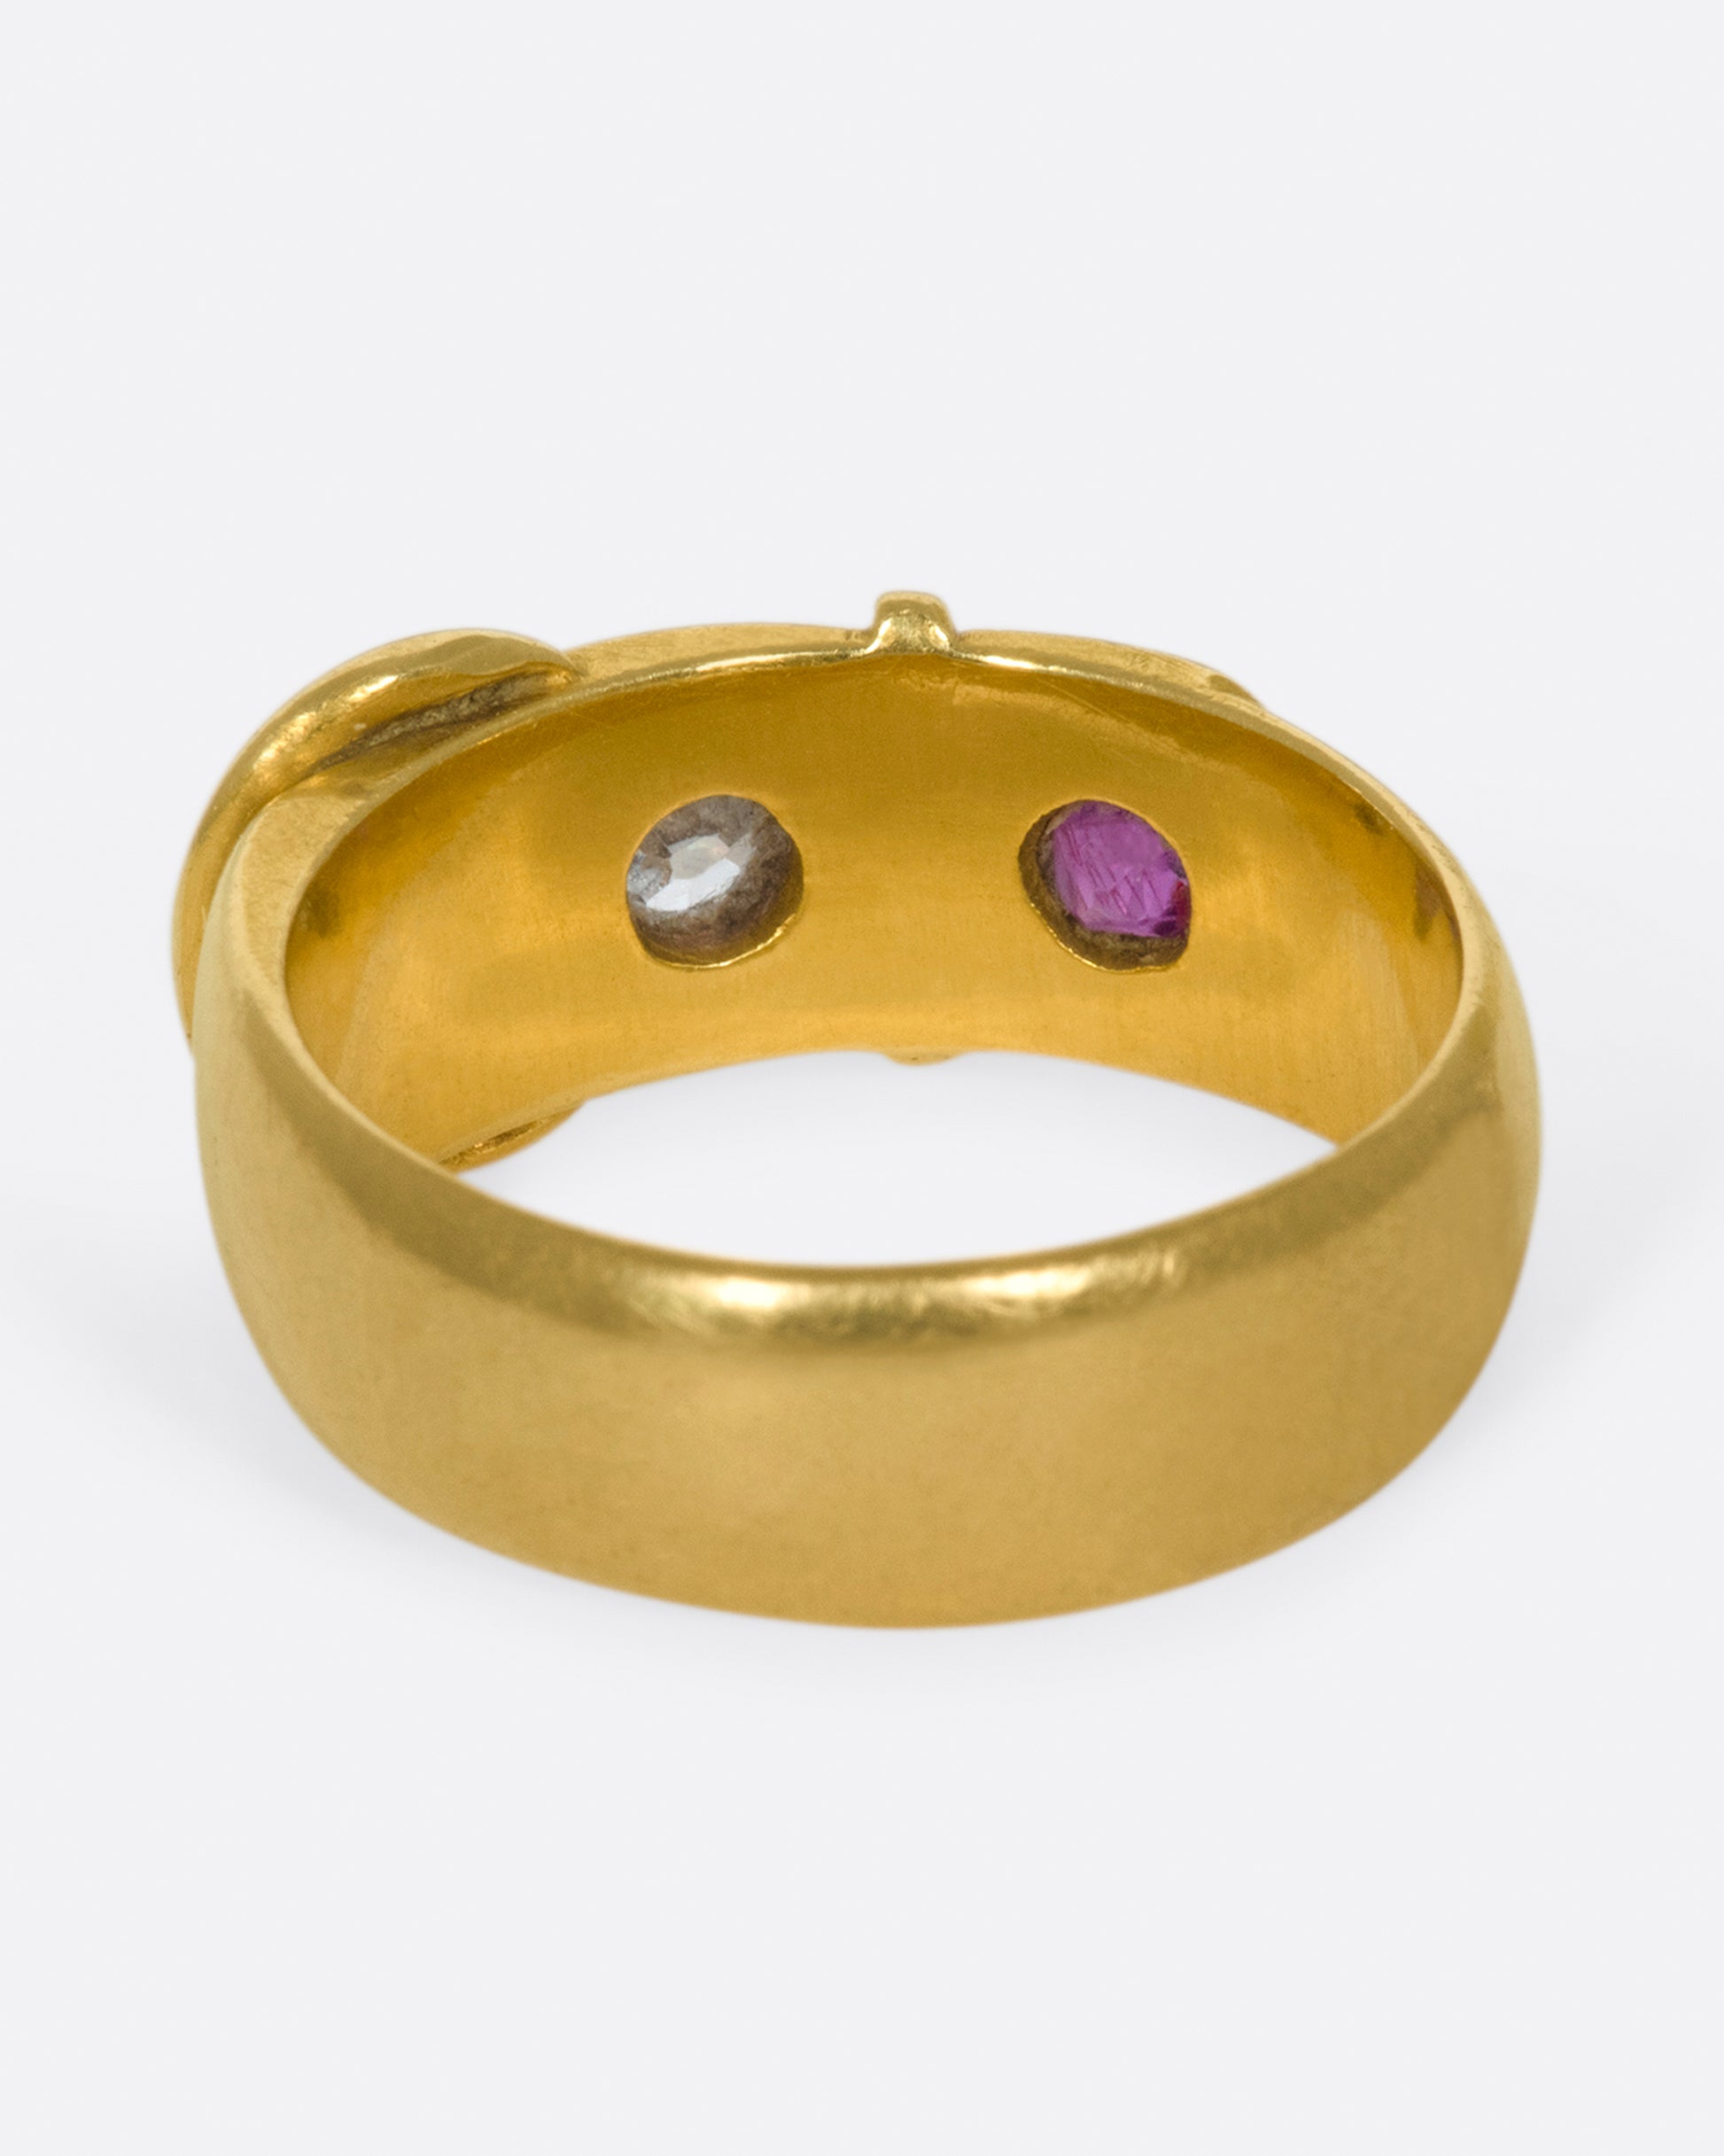 Dating back 1891 in Birmingham, England, this buckle ring is buttery soft with vibrant stones.